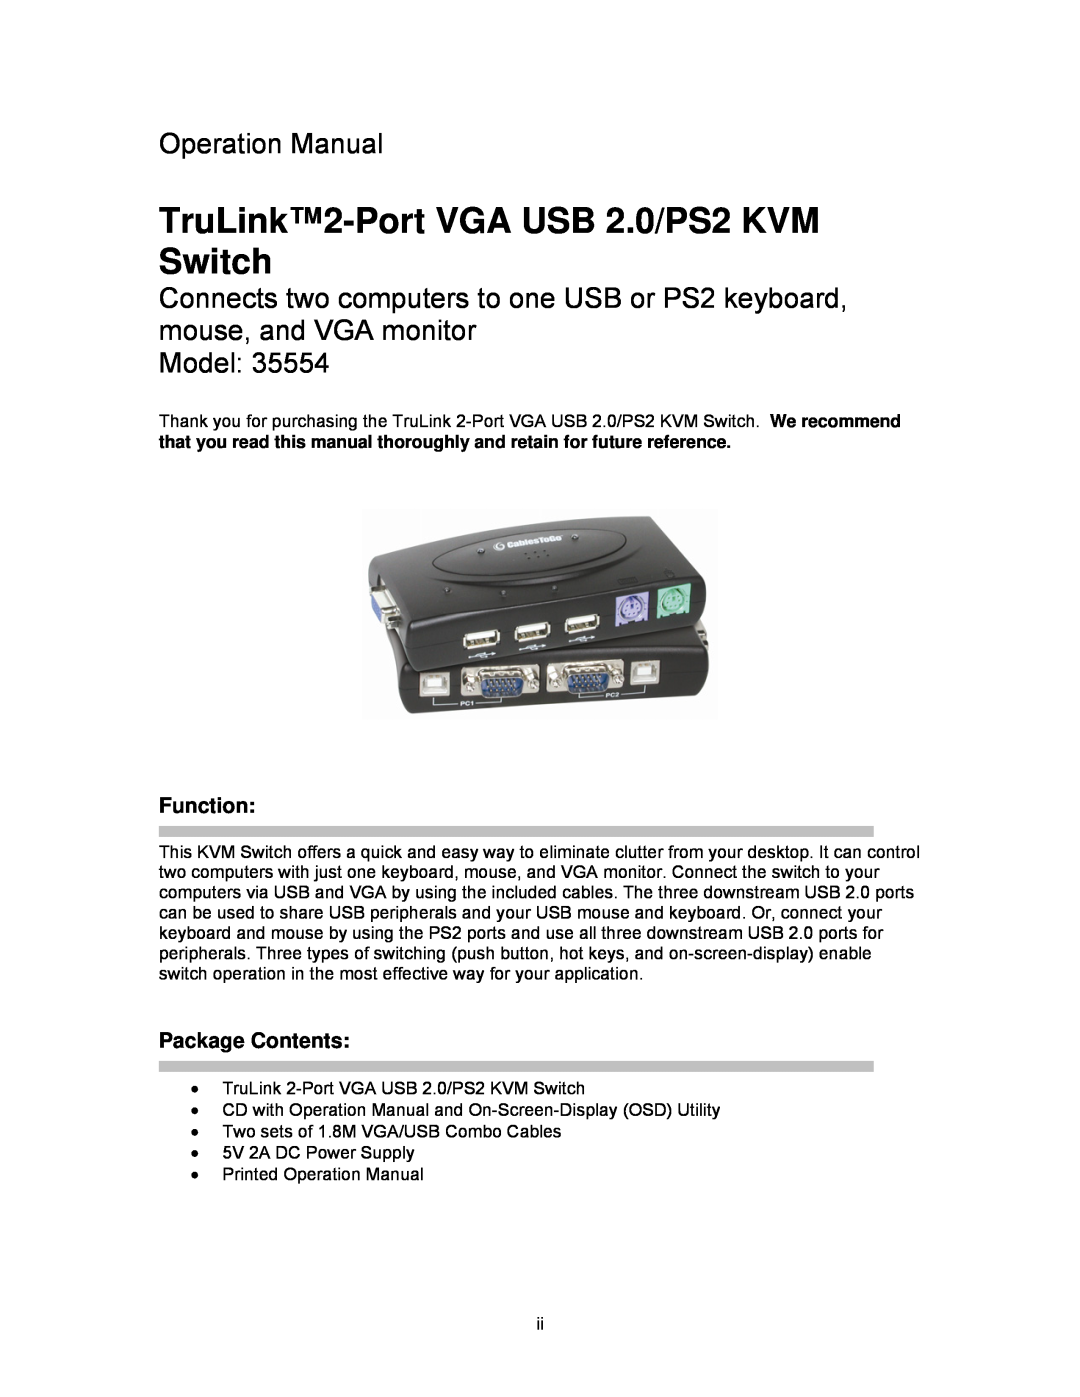 Cables to Go 35554 TruLink2-Port VGA USB 2.0/PS2 KVM Switch, Operation Manual, Model, Function, Package Contents 